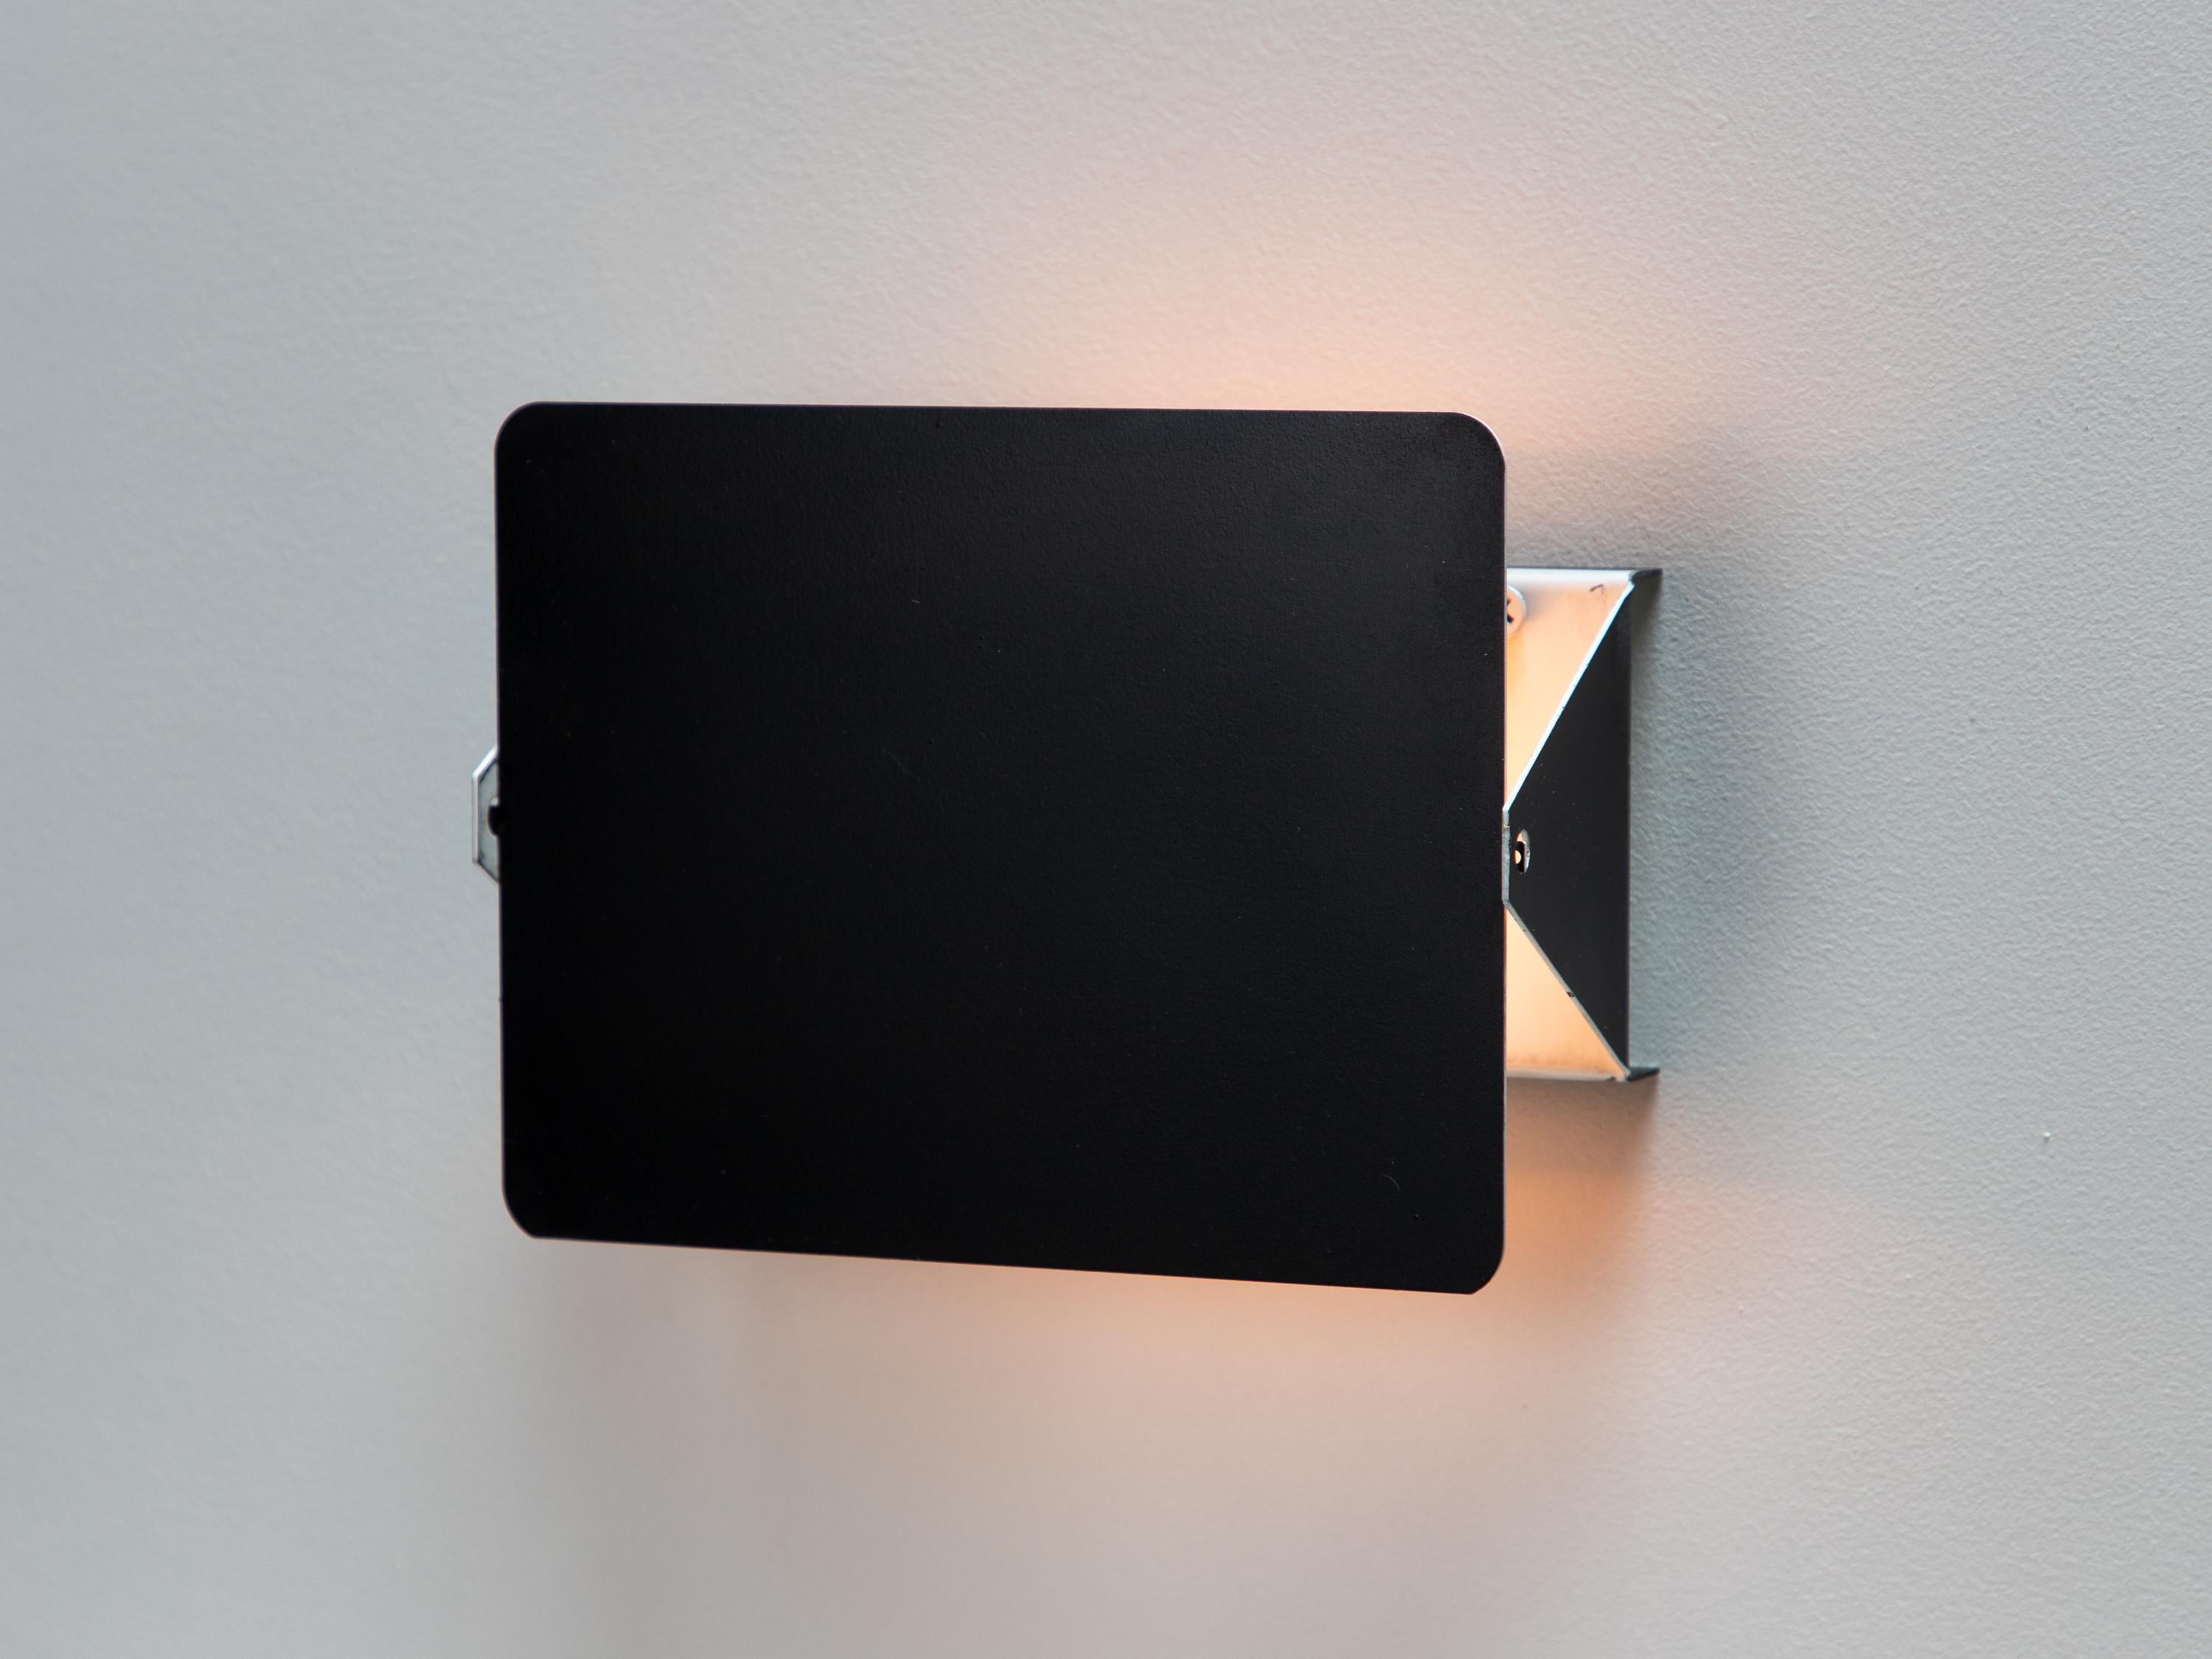 Aluminum Vintage Charlotte Perriand Les Arcs CP1 Wall Light or Sconces - Black For Sale